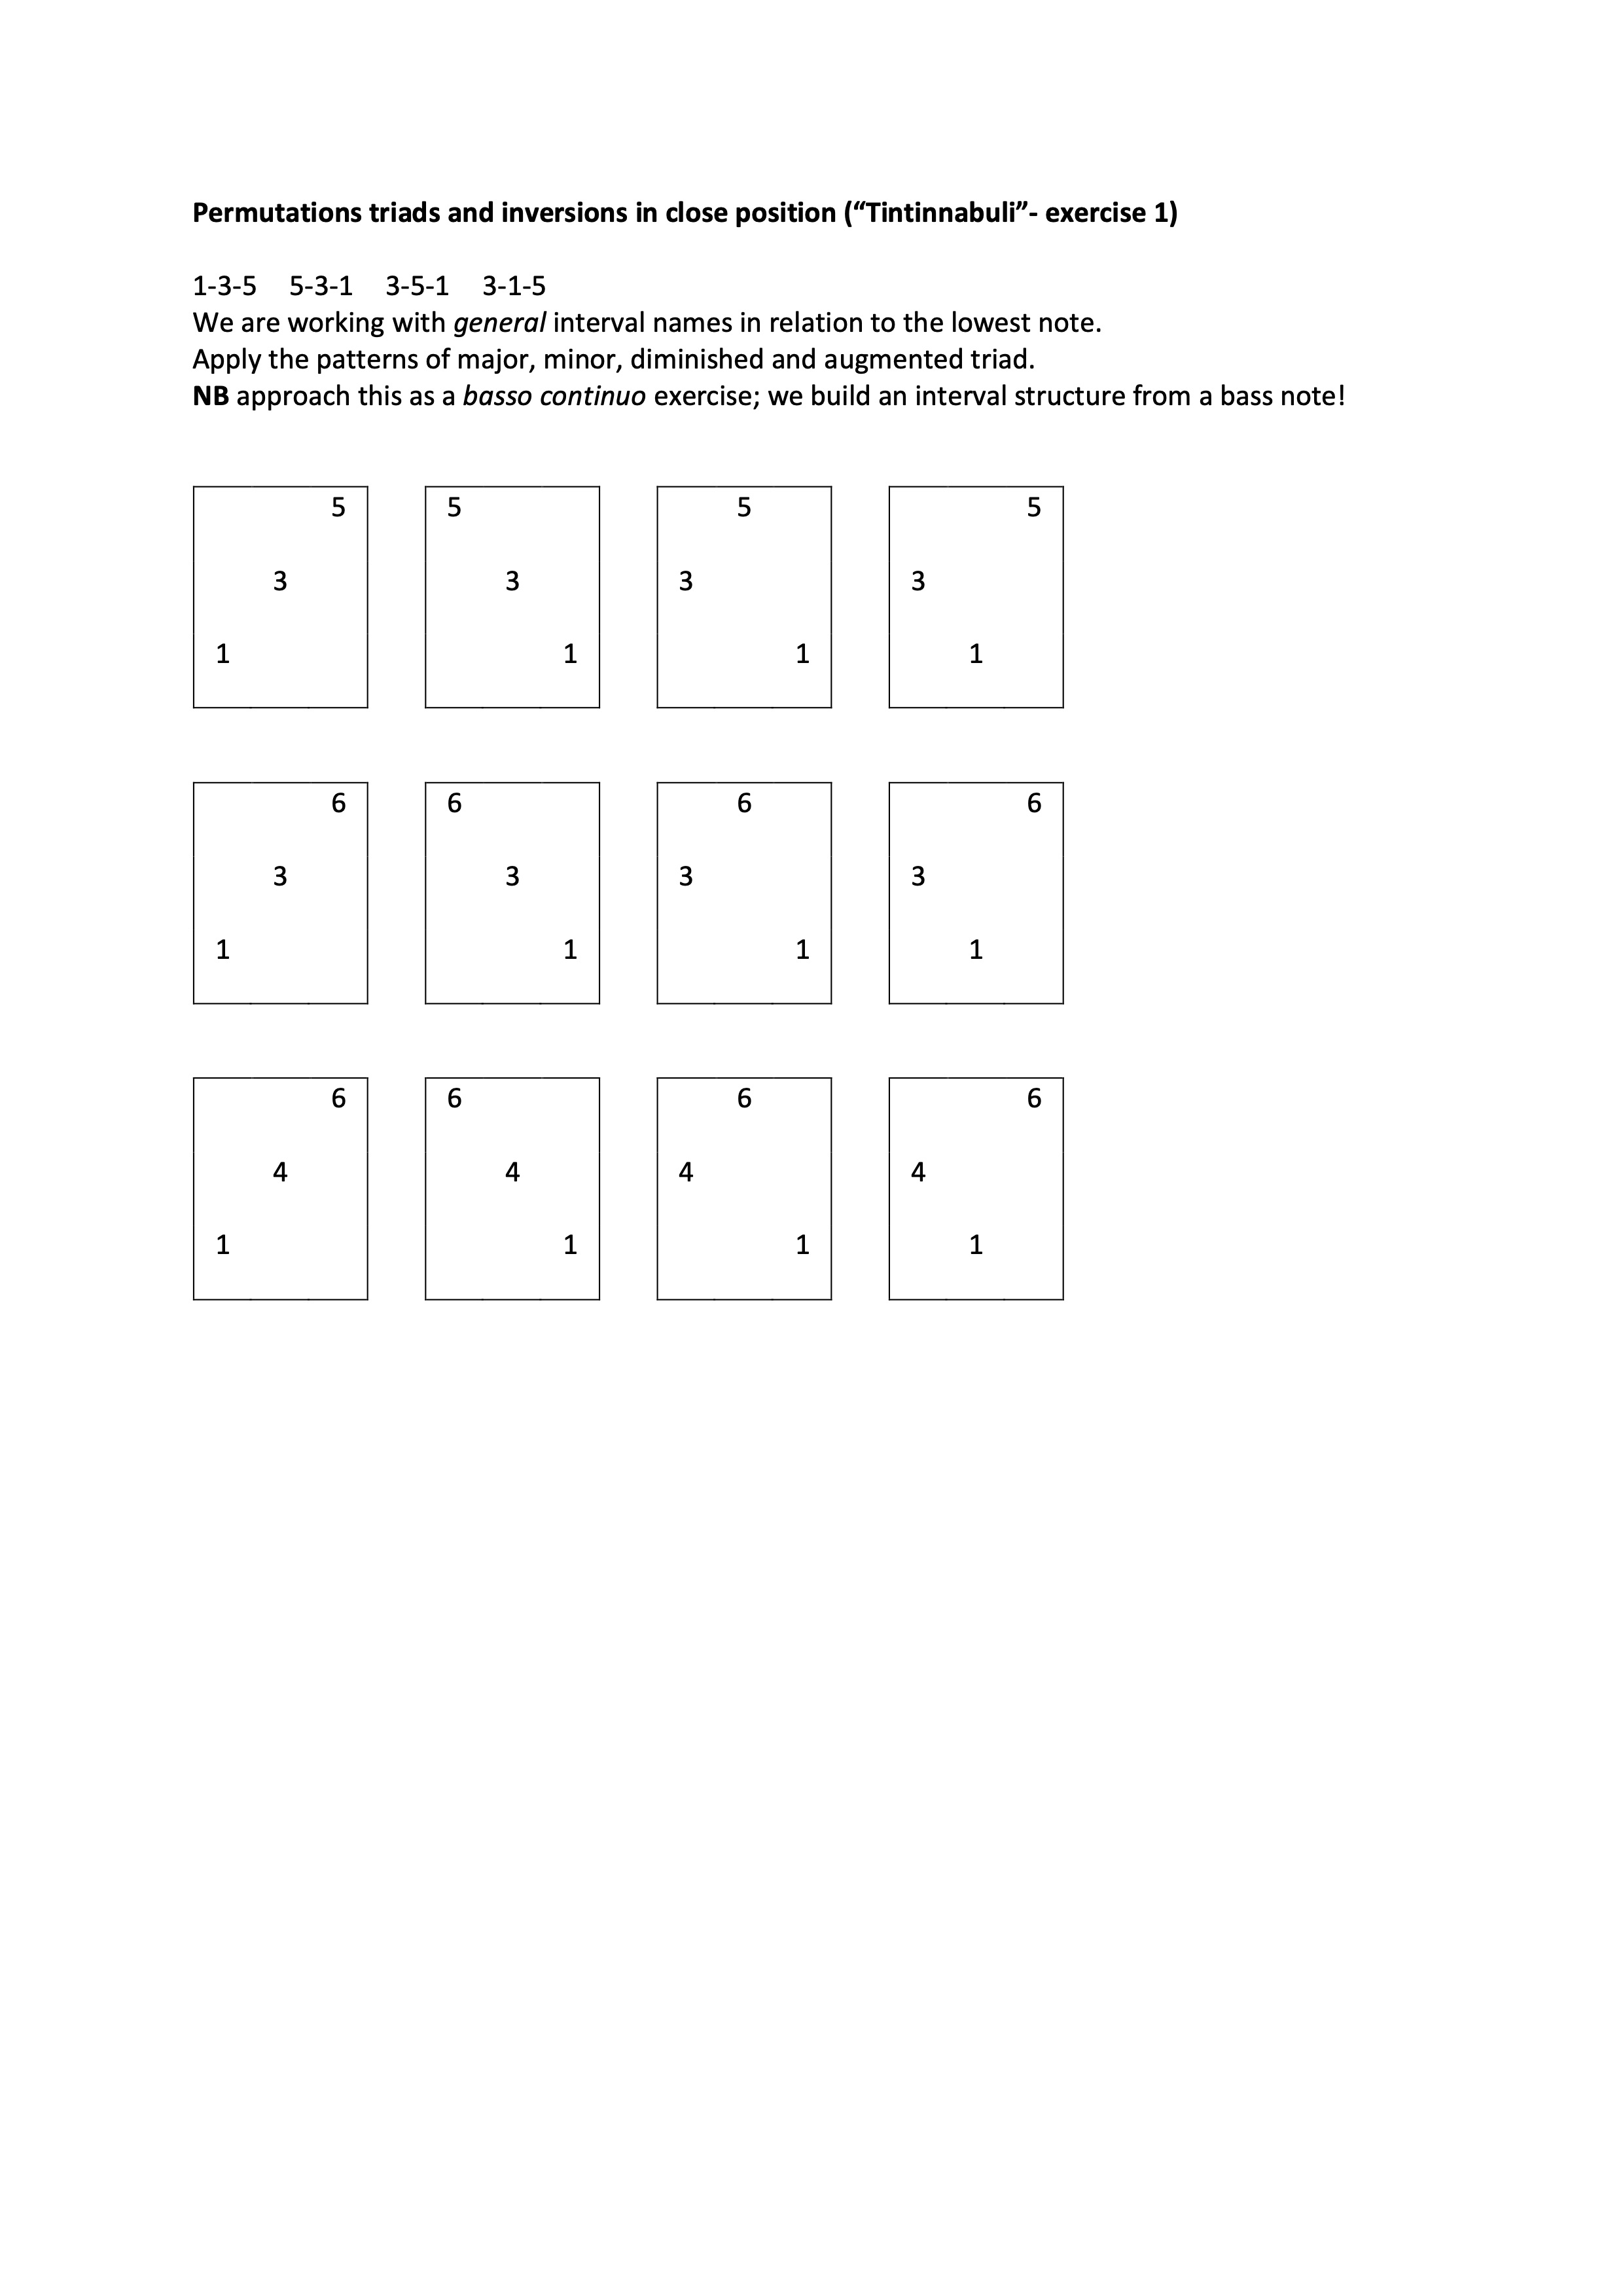 Permutations triad and inversions close and open position tintinnabuli exercise 1 word.jpg